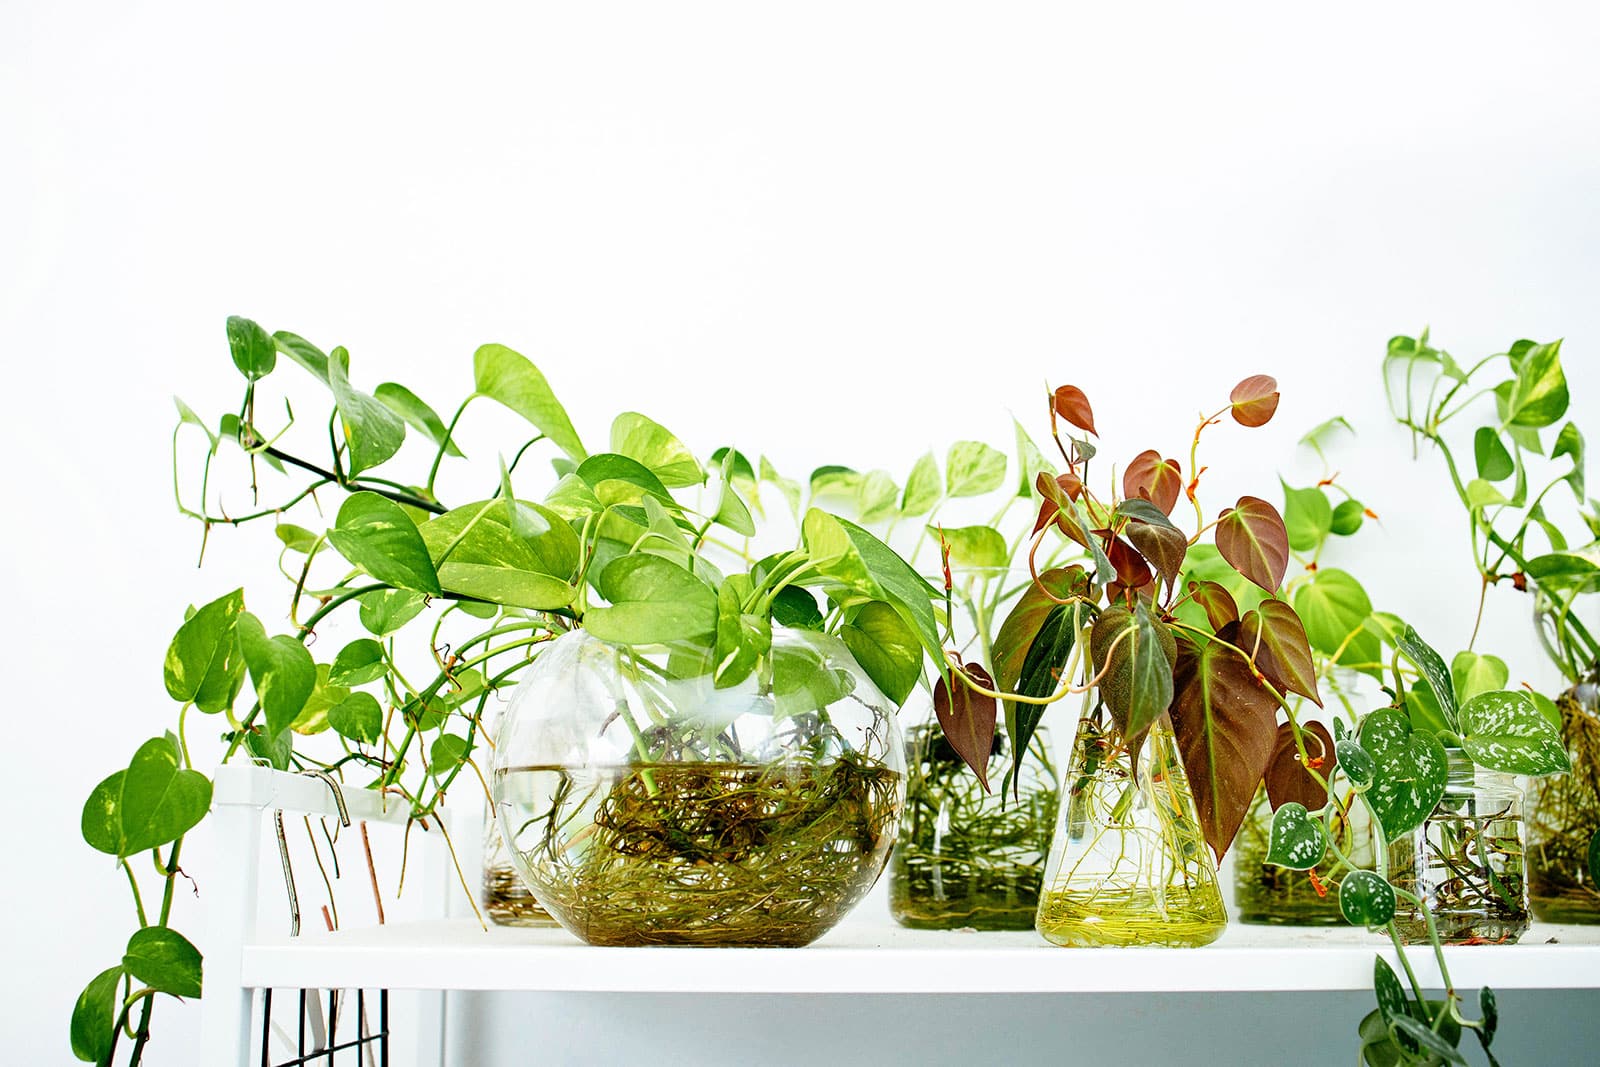 A grouping of houseplants growing in water on a white shelf